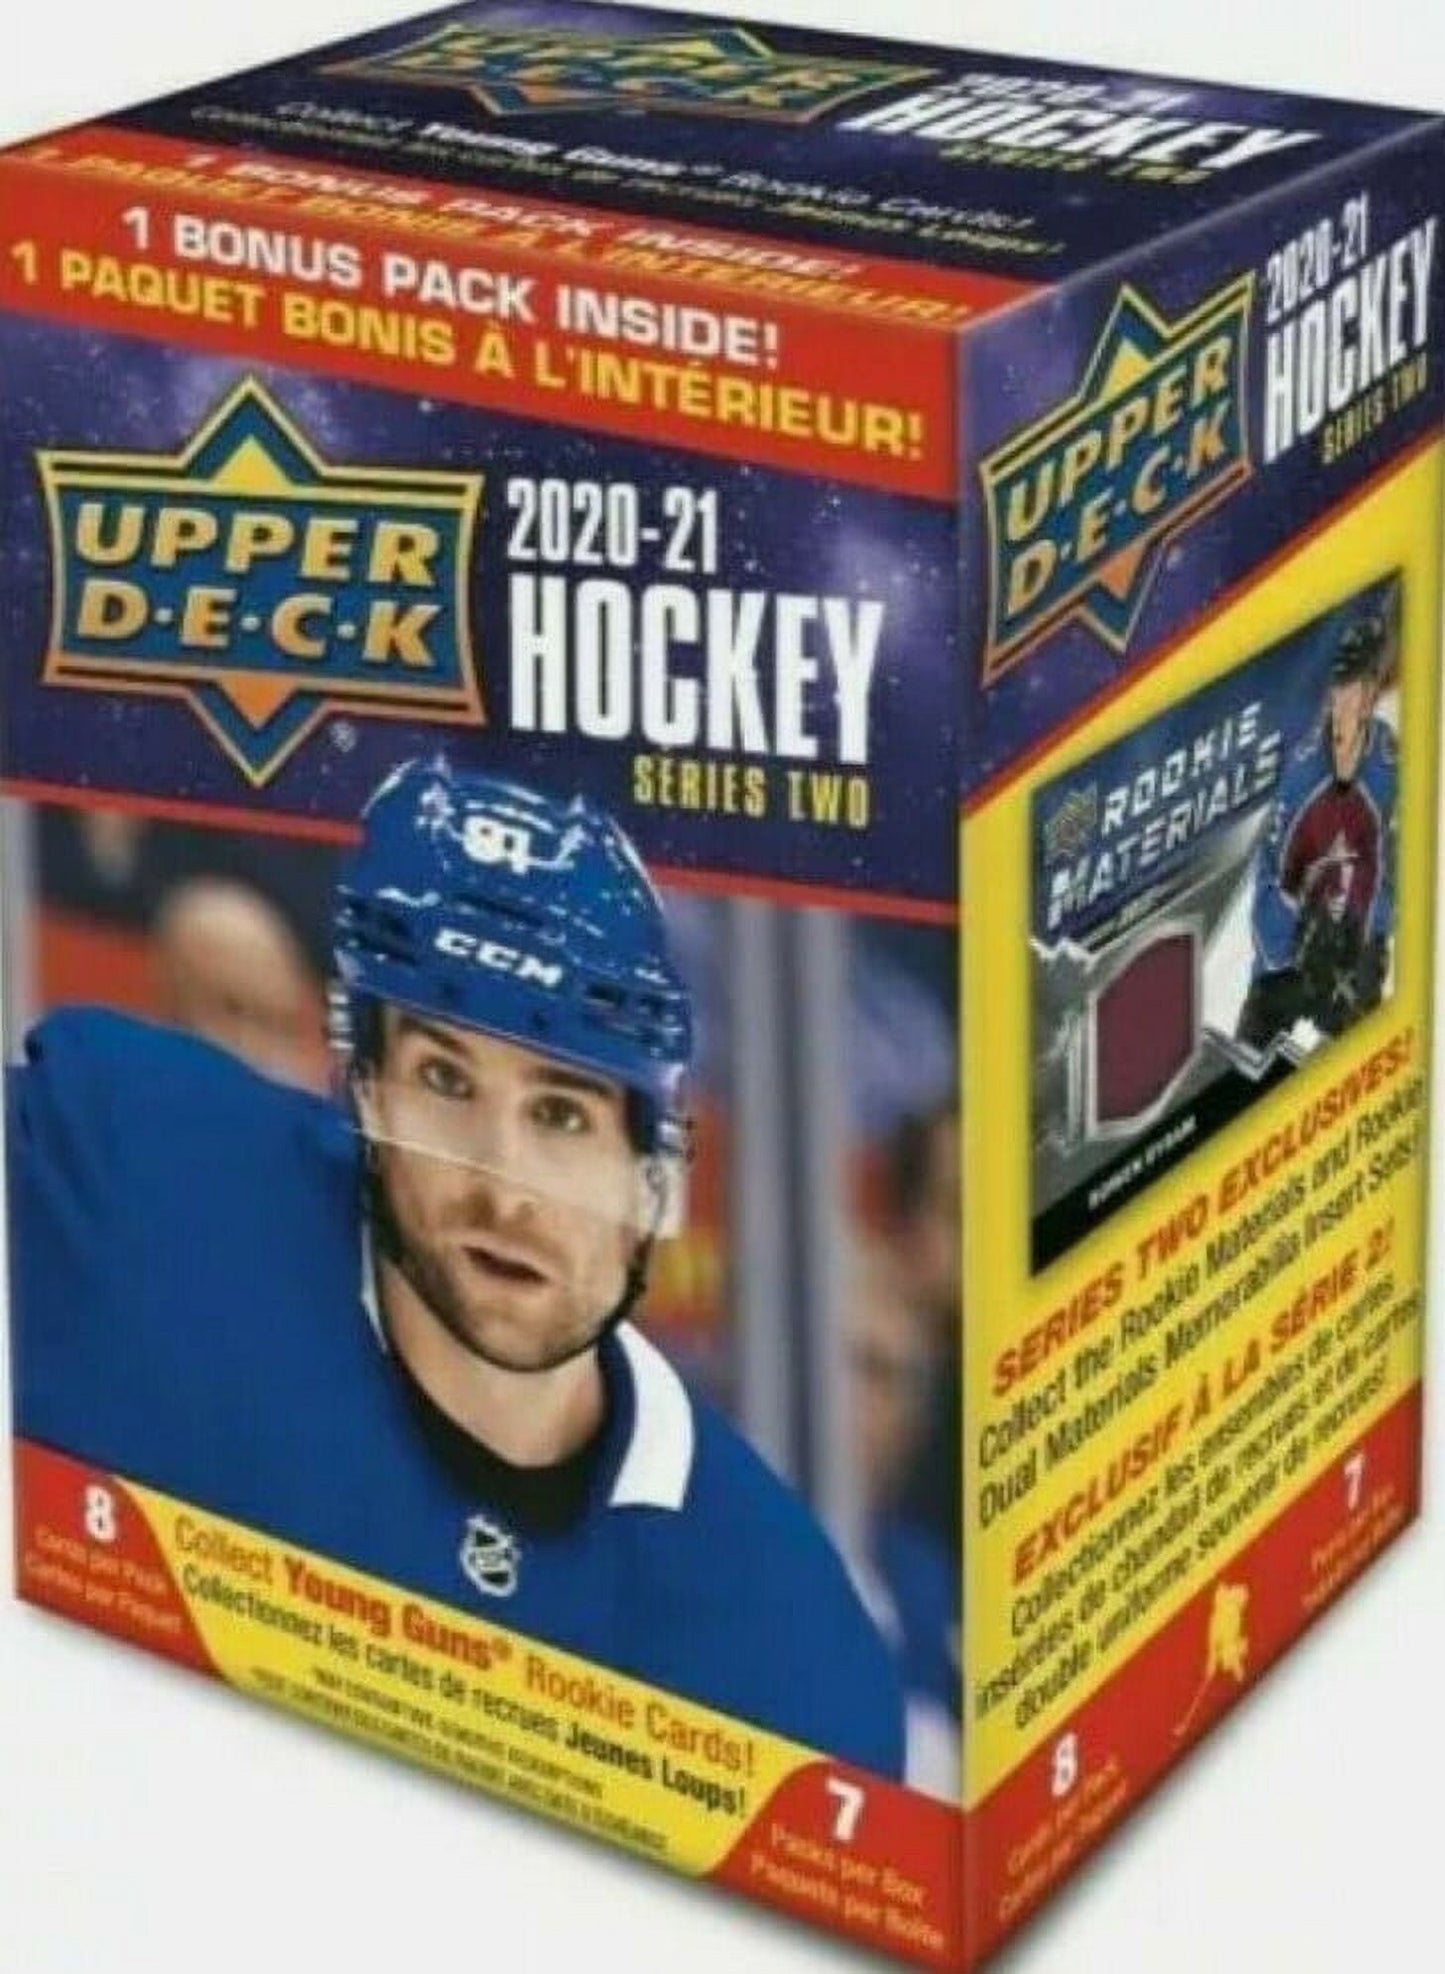 2020 2021 Upper Deck Series Two Blaster Box of Packs with 56 Cards Total